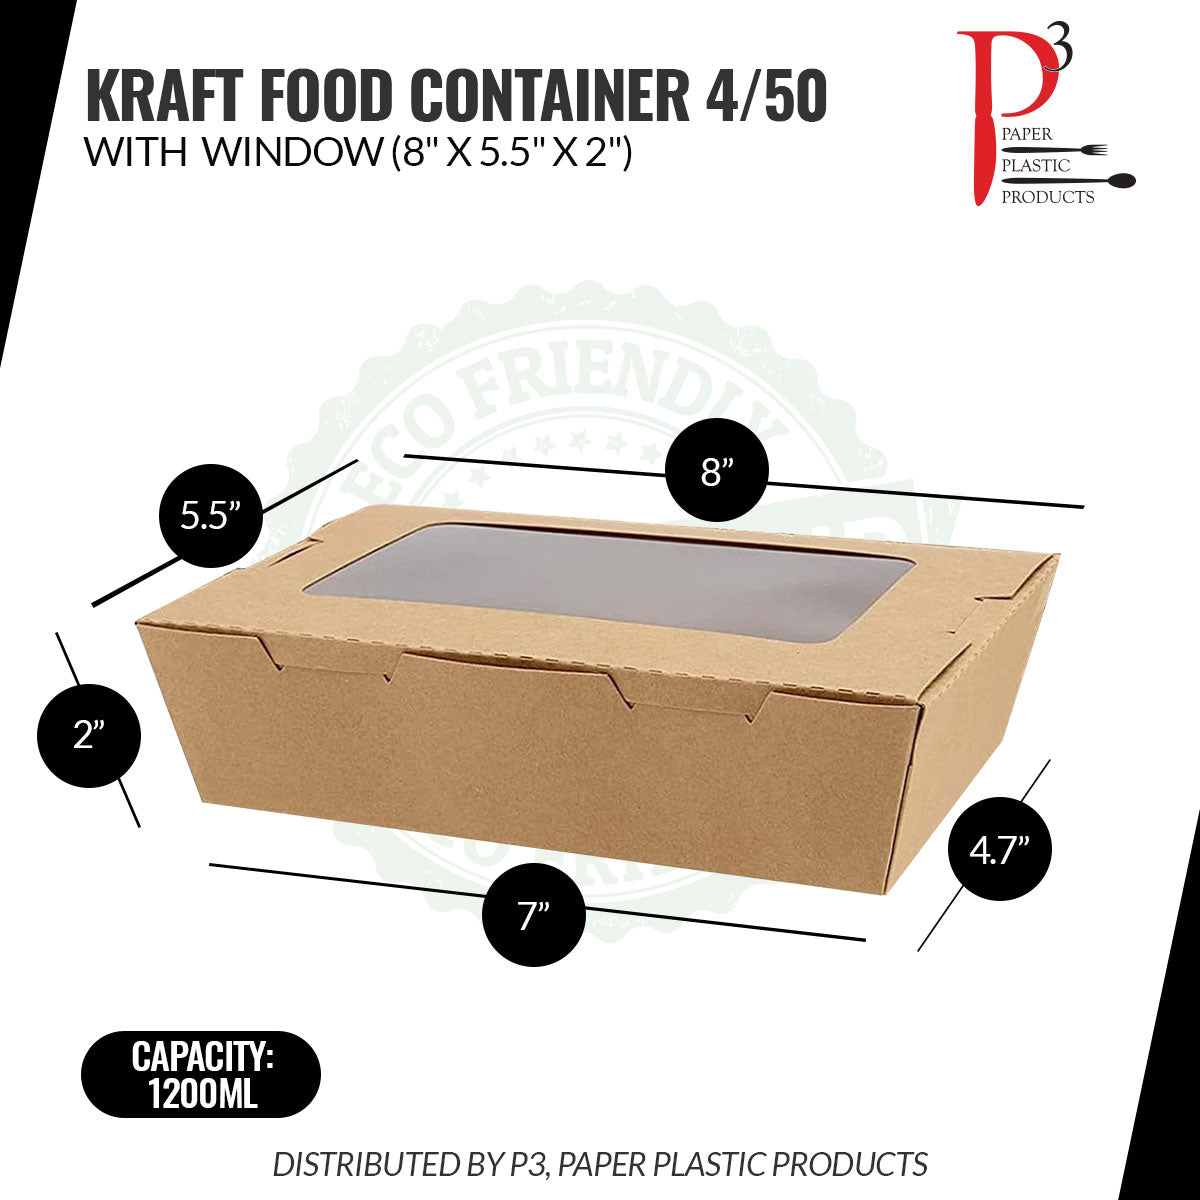 Kraft Food Container with window 8" x 5.5" x 2" 4/50